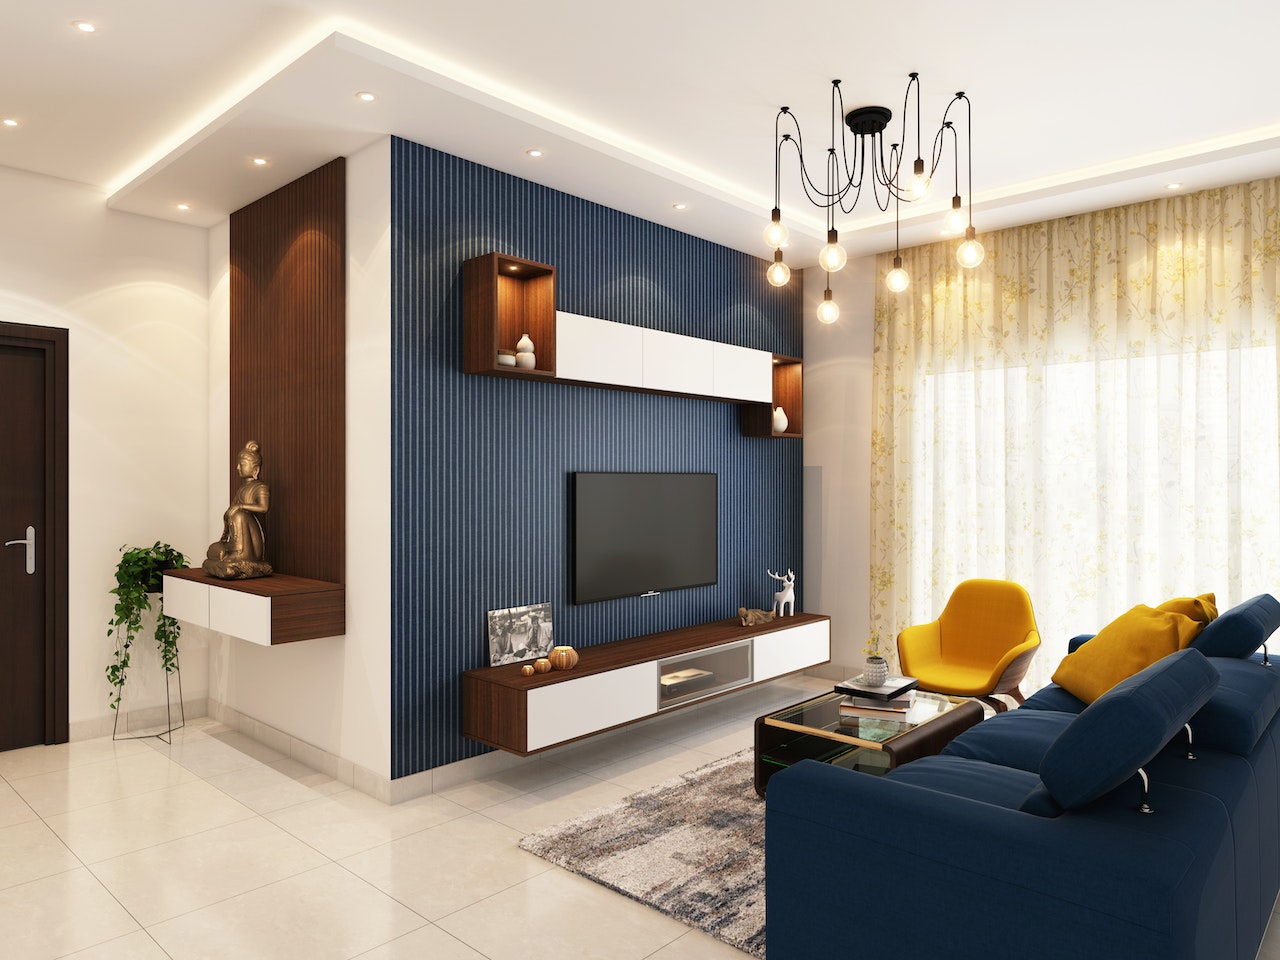 How much will it cost for a high quality interior work for a house in  India  Quora